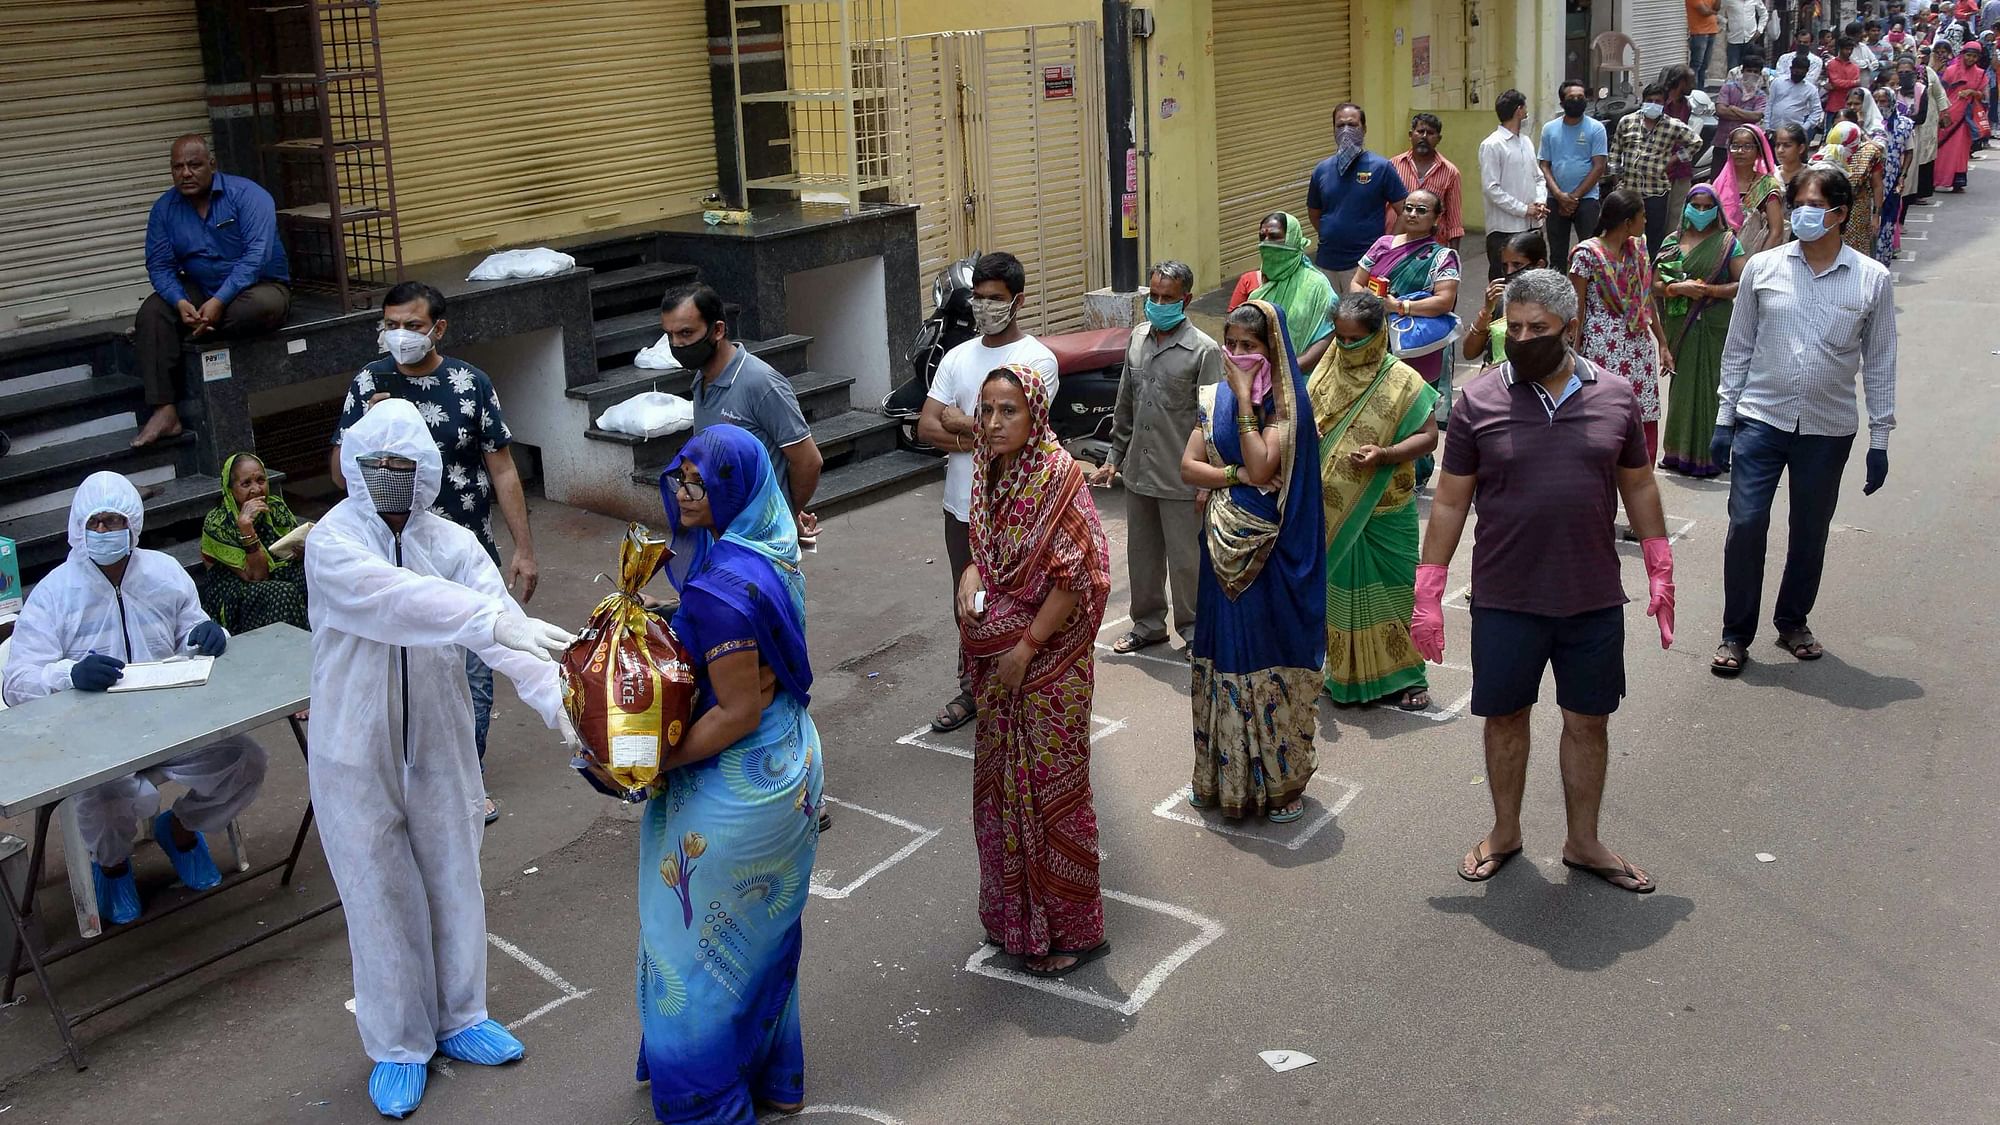 NGO workers distribute relief material among needy people during a nationwide lockdown, imposed in the wake of coronavirus pandemic, at Begum Bazaar in Hyderabad, Friday, 3 April.